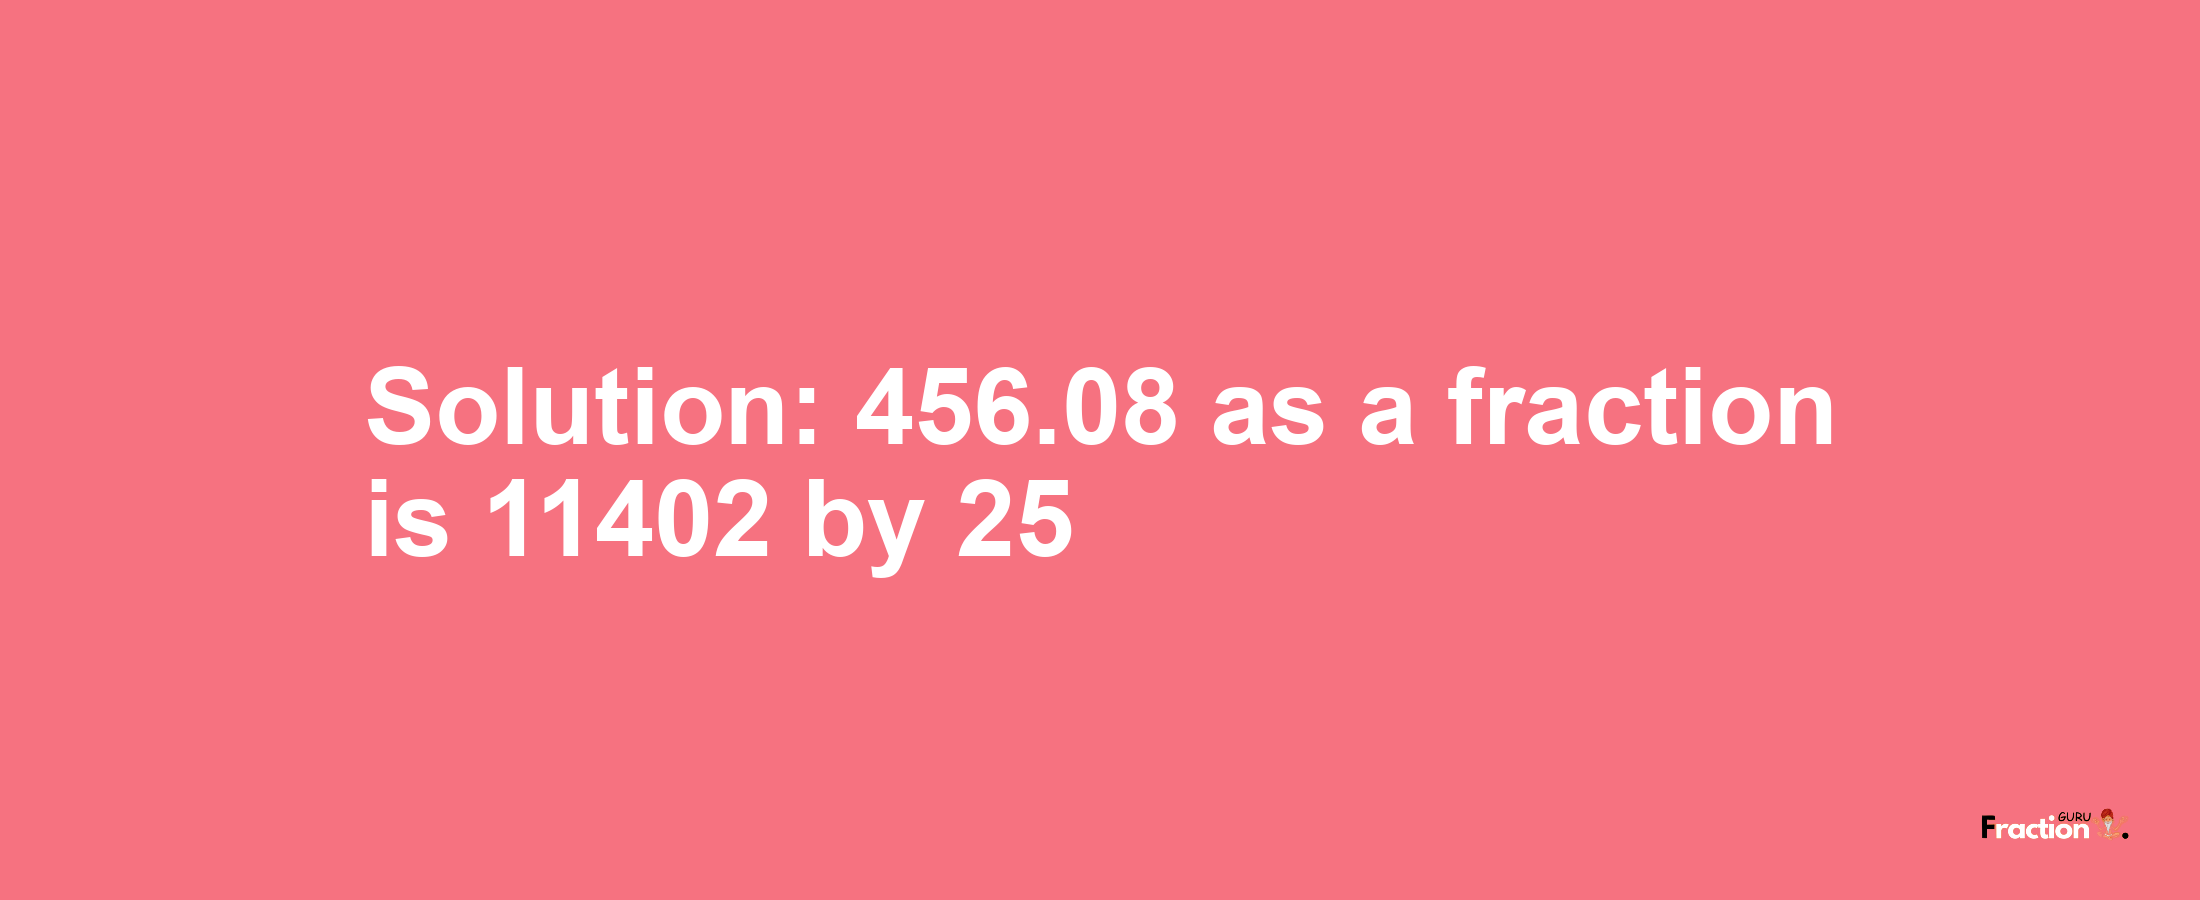 Solution:456.08 as a fraction is 11402/25